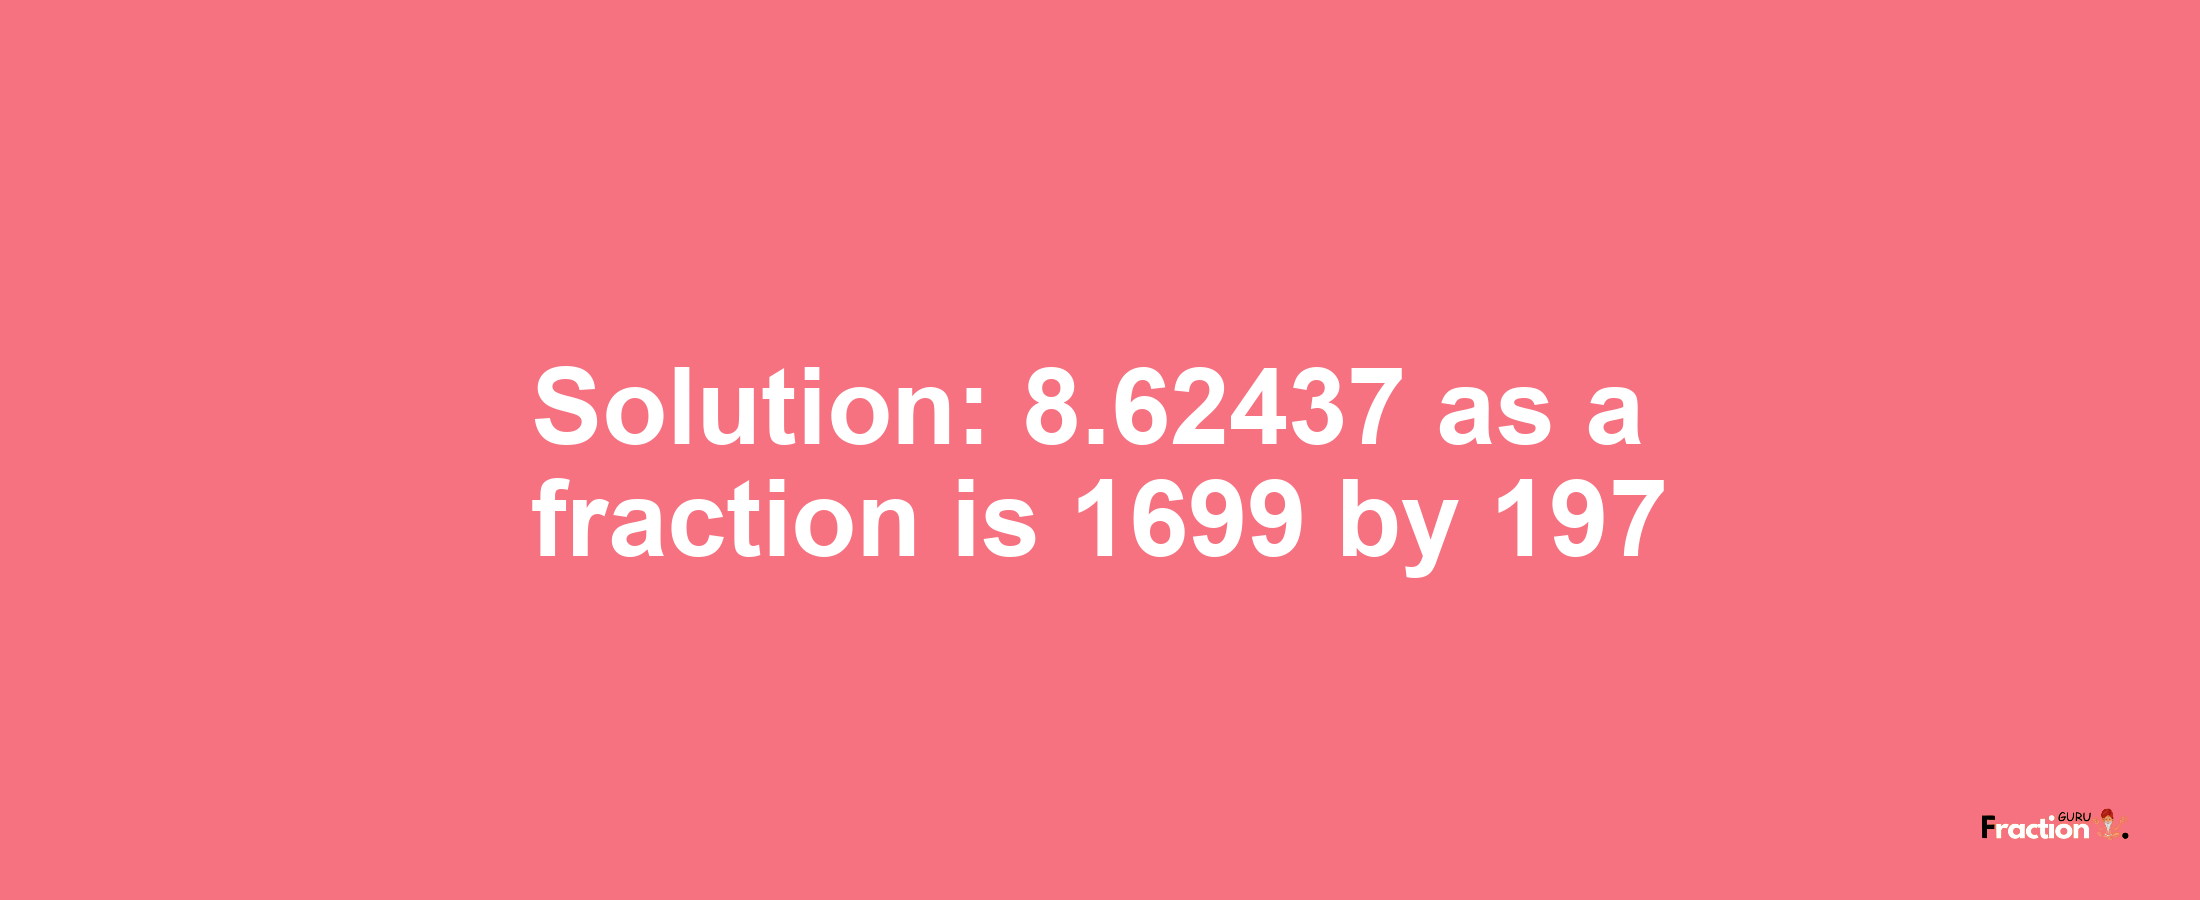 Solution:8.62437 as a fraction is 1699/197